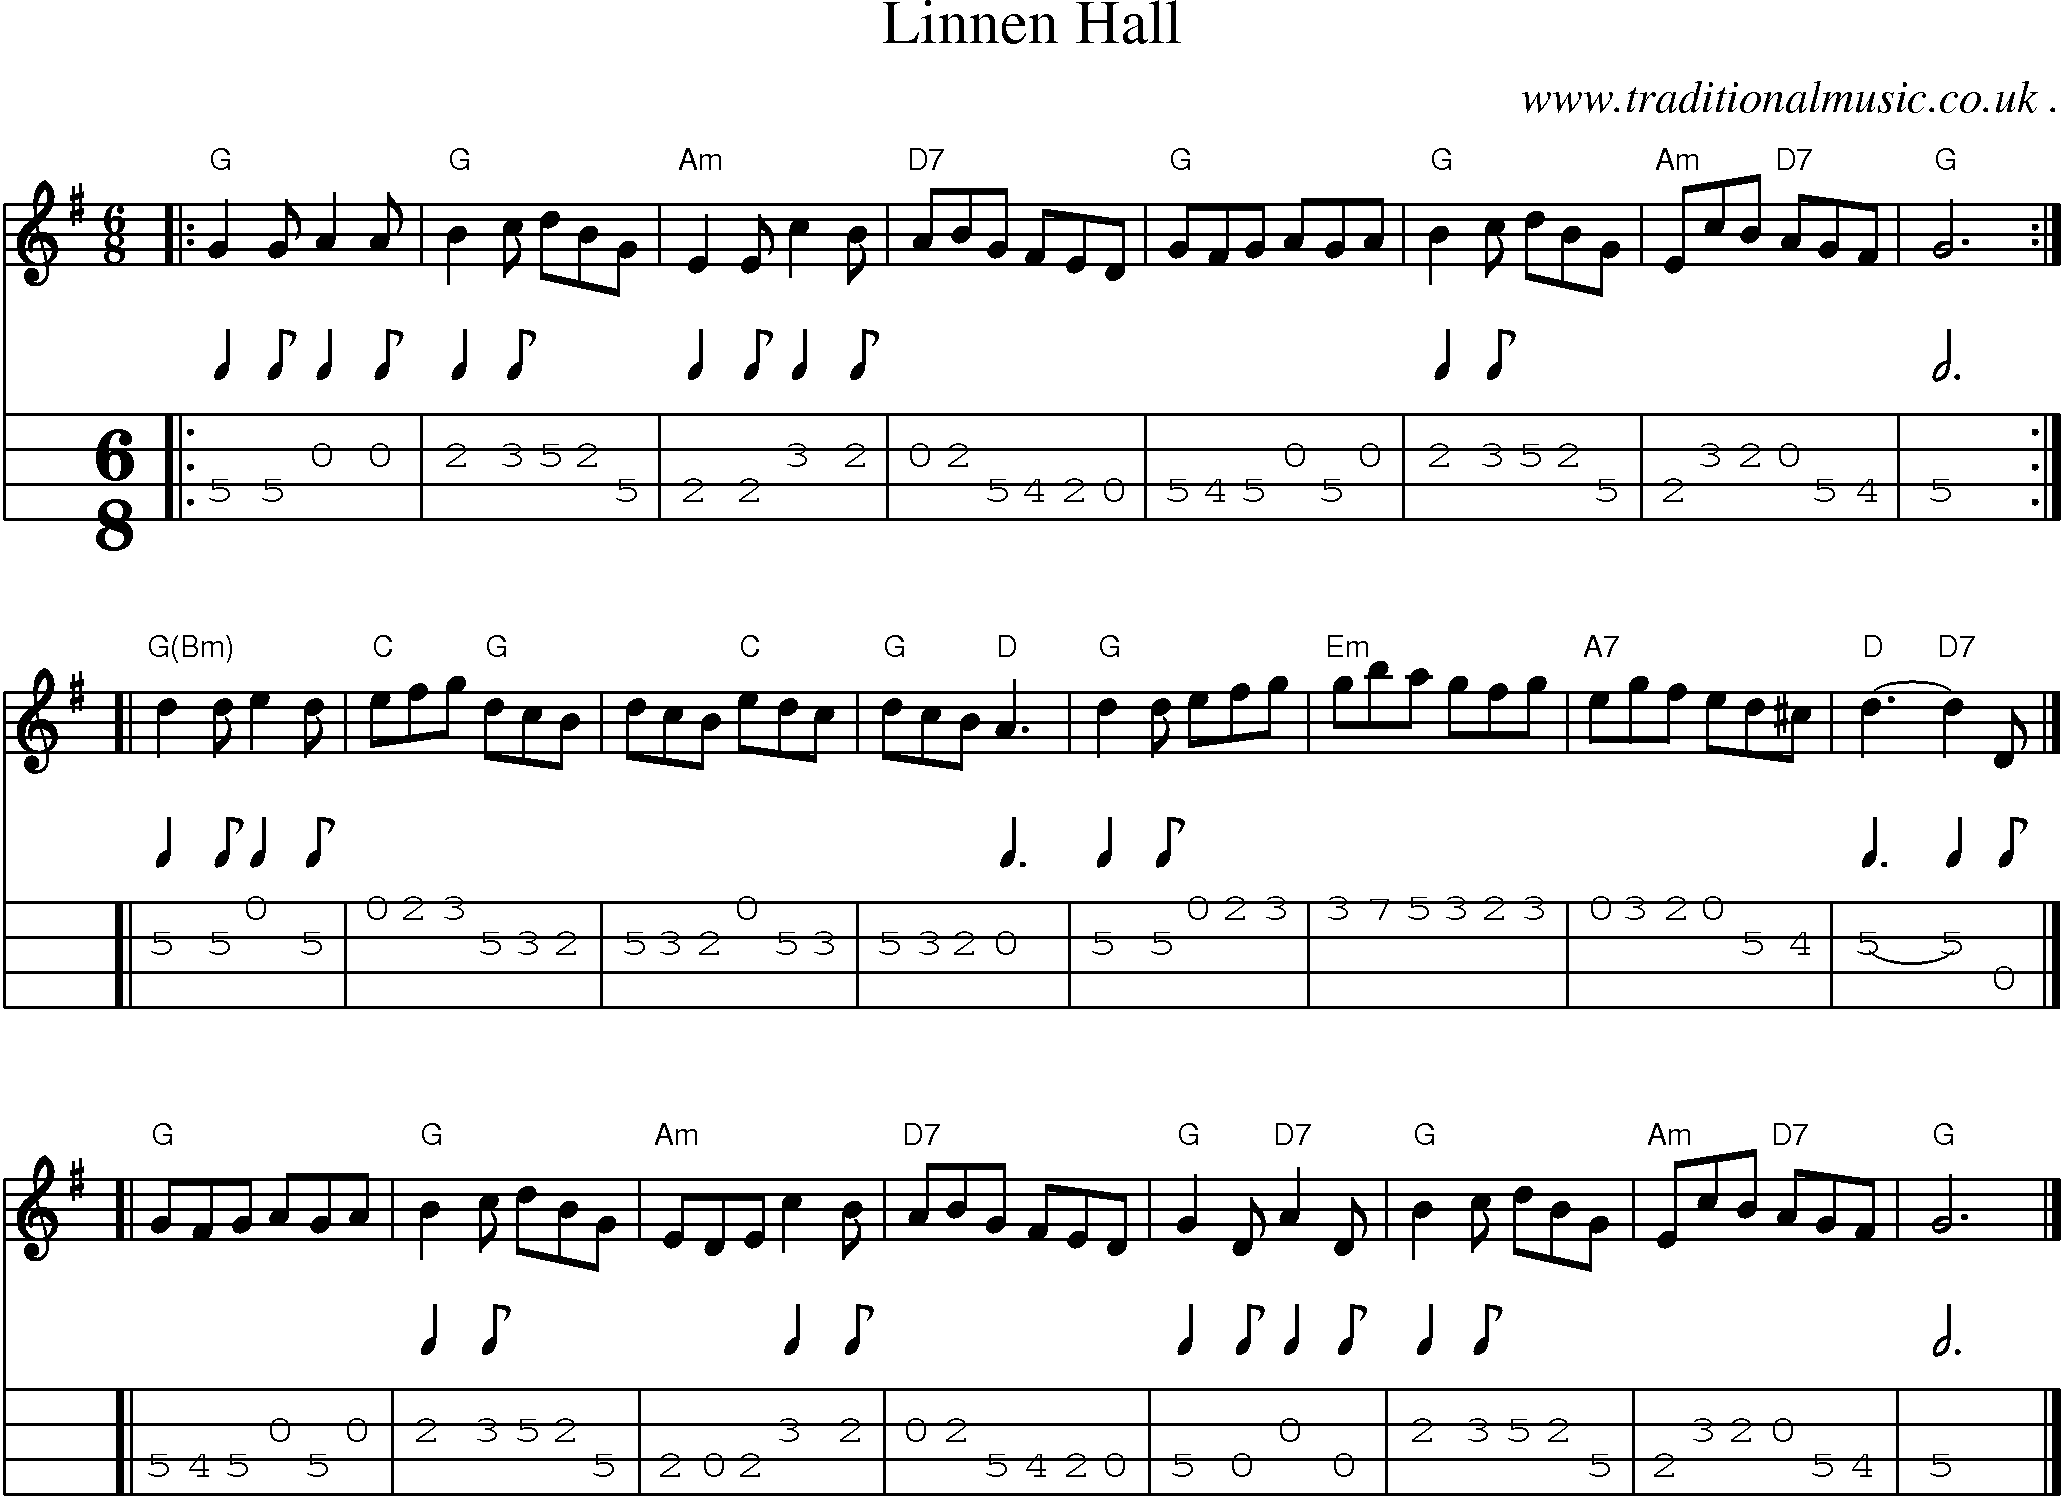 Sheet-music  score, Chords and Mandolin Tabs for Linnen Hall